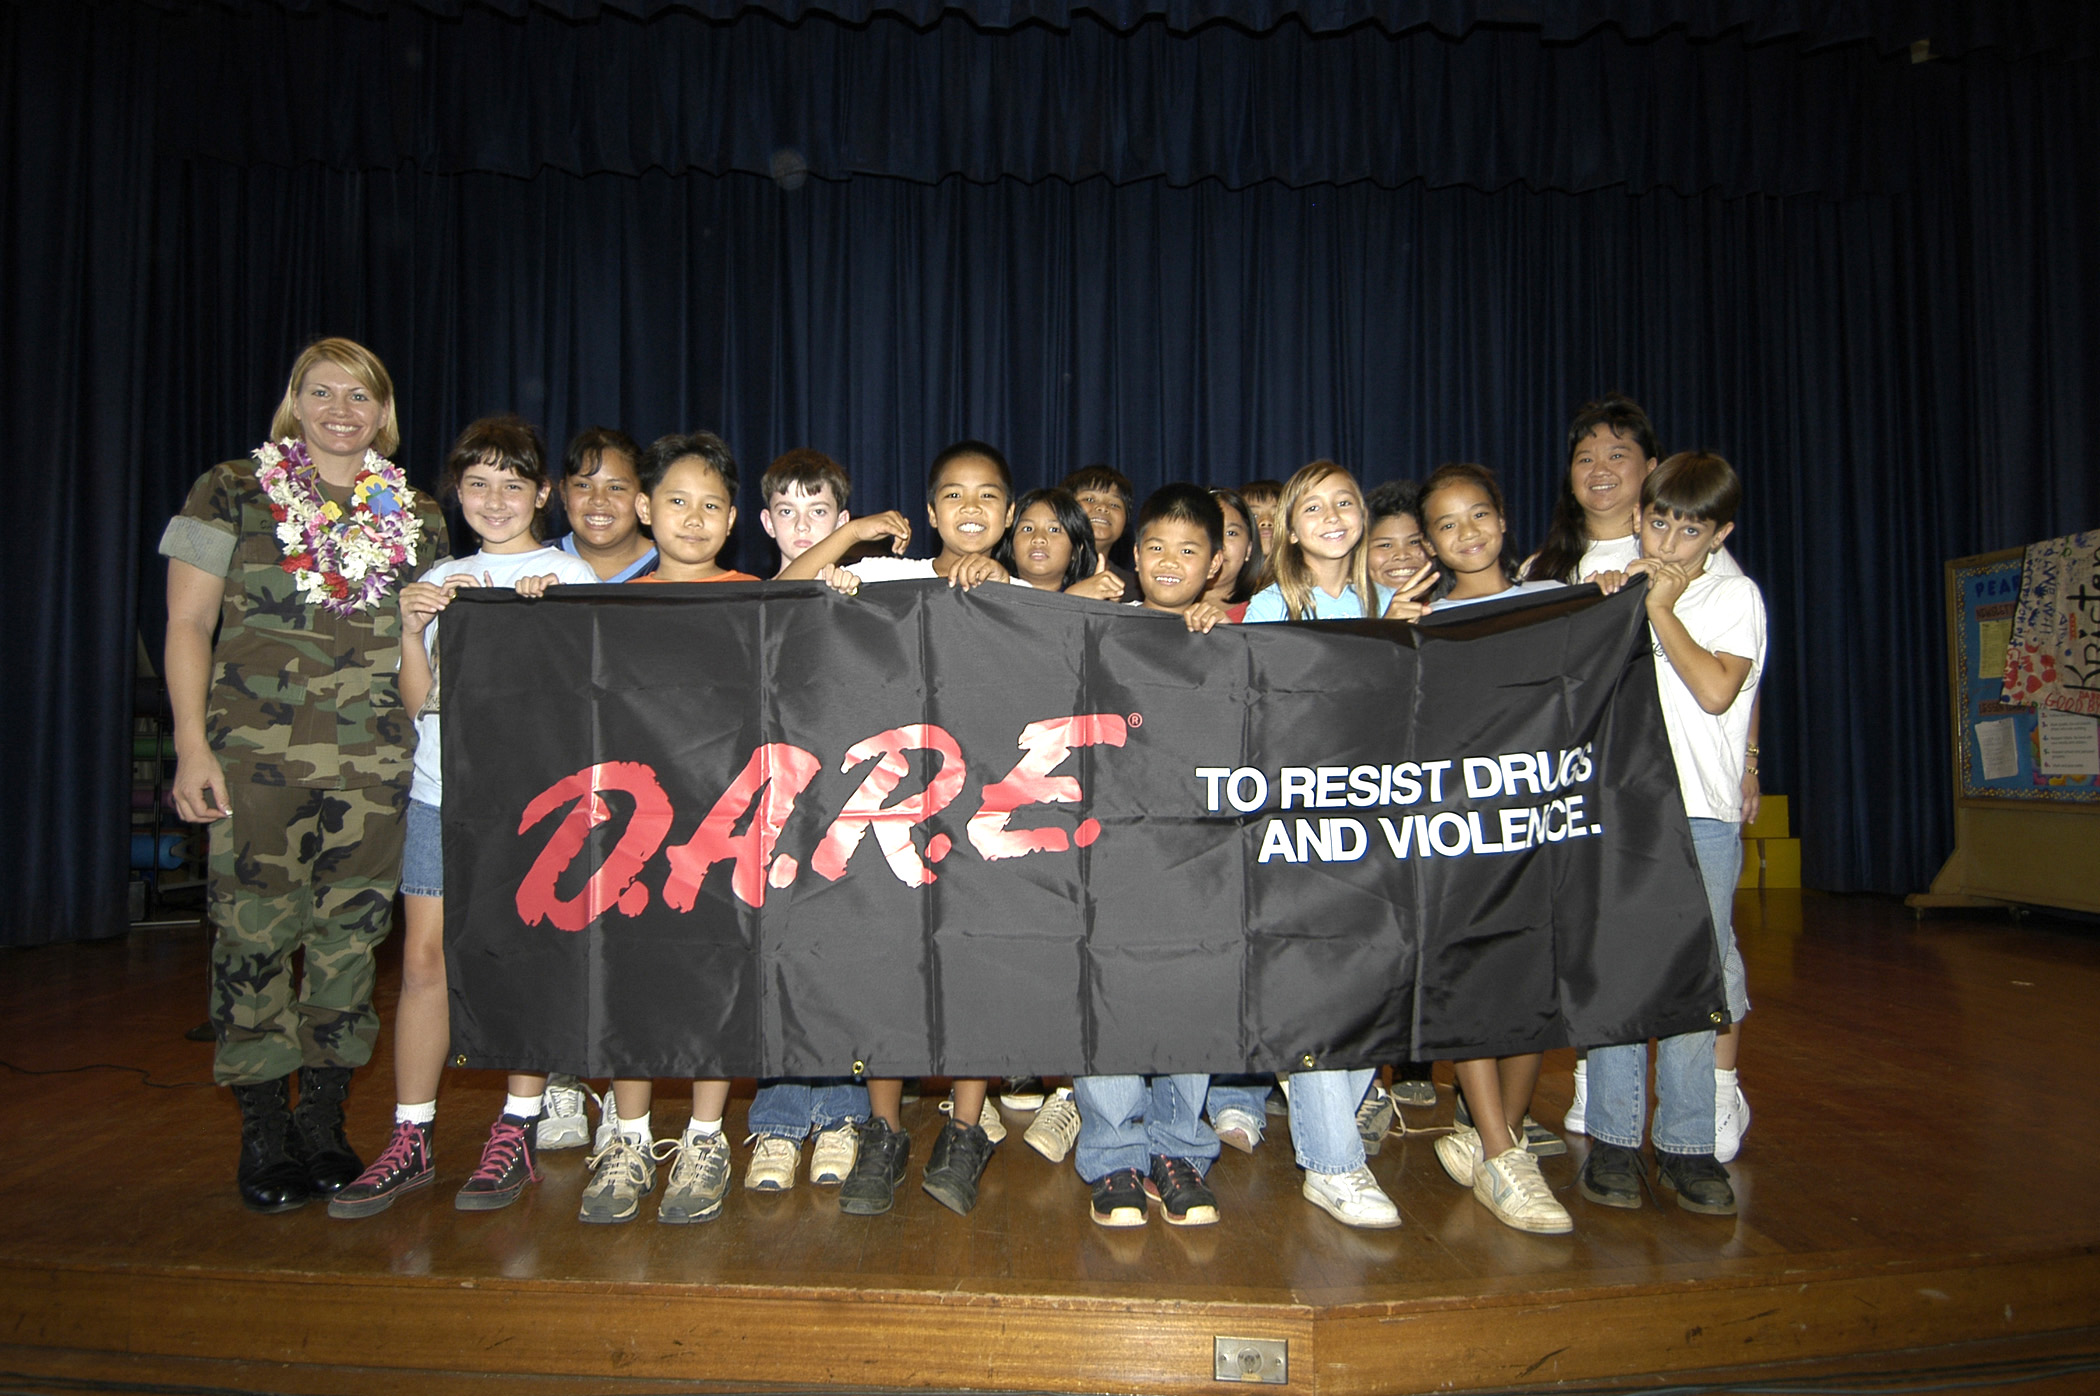 US_Navy_050531-N-3207B-046_Master-at-Arms_1st_Class_Stacey_Carfley_stands_with_her_recent_class_of_Drug_Abuse_Resistance_Education_(D.A.R.E.)_program_graduates_at_Pearl_Harbor_Elementary_School